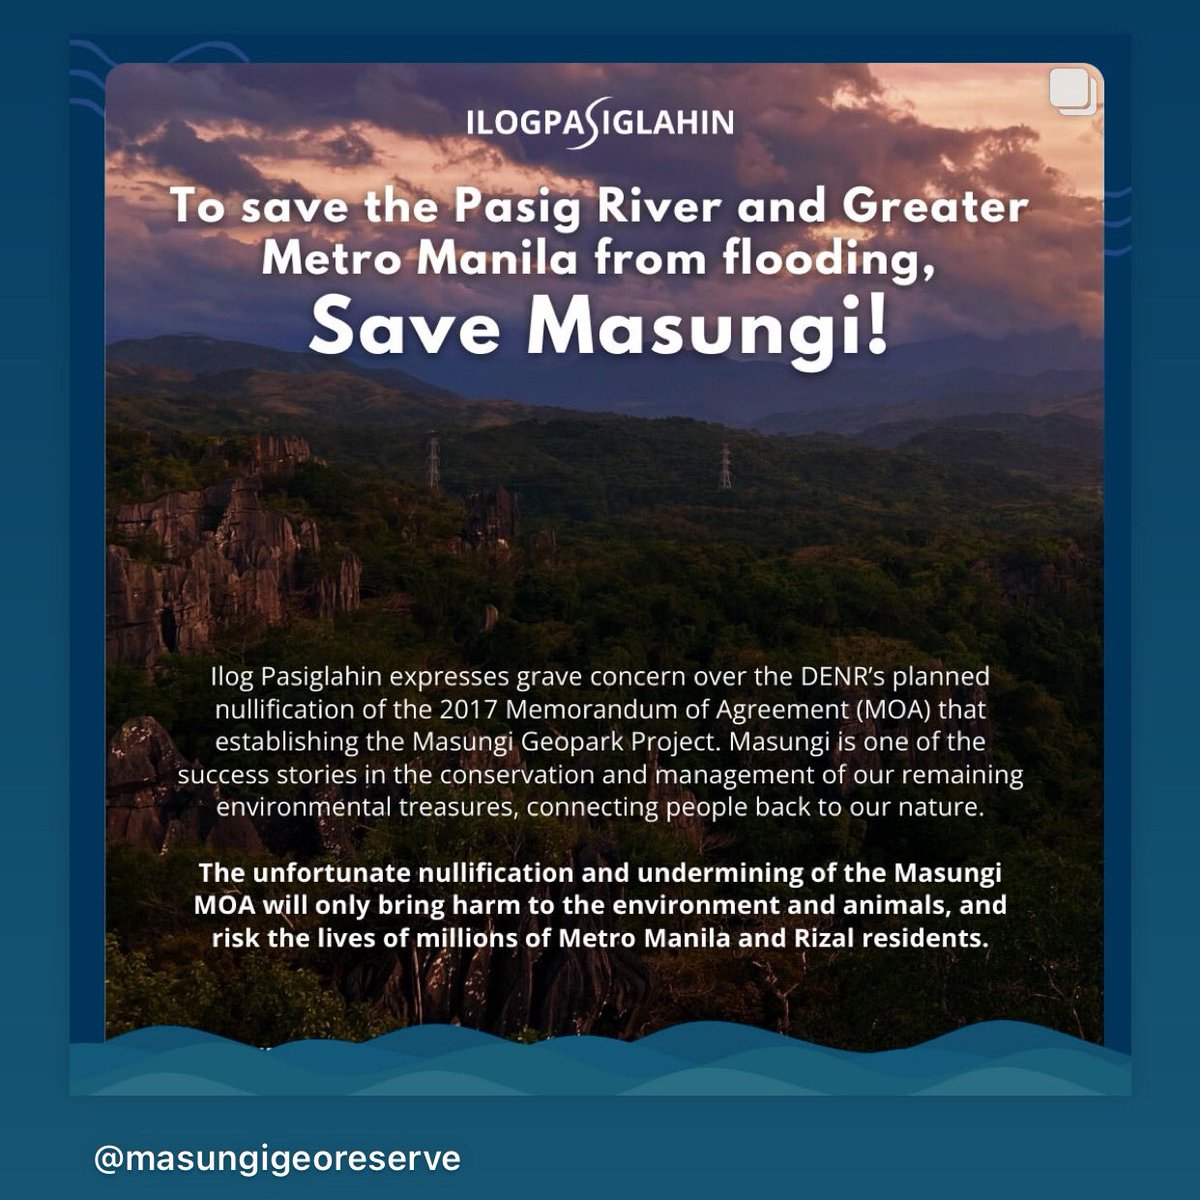 so after the chocolate hills resort fiasco, tarsier issue, homonhon island controversy, here’s another one- masungi geopark 

hanggang kailan kayo magiging incompetent, @DENROfficial? you’re supposed to protect our environment + natural resources but these issues tell otherwise.